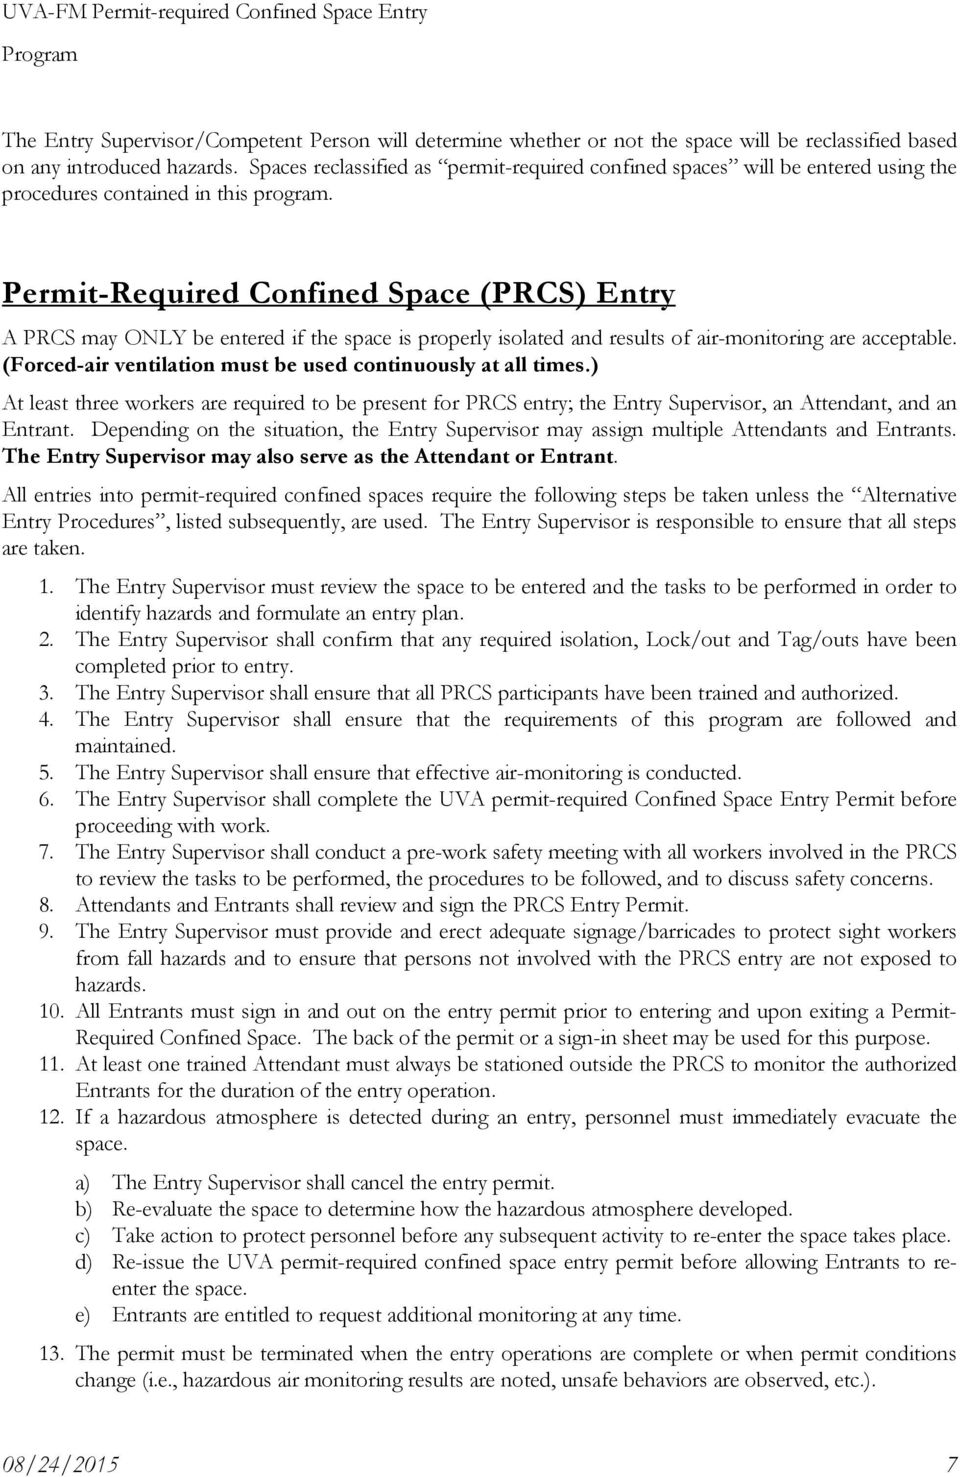 Permit-Required Confined Space (PRCS) Entry A PRCS may ONLY be entered if the space is properly isolated and results of air-monitoring are acceptable.